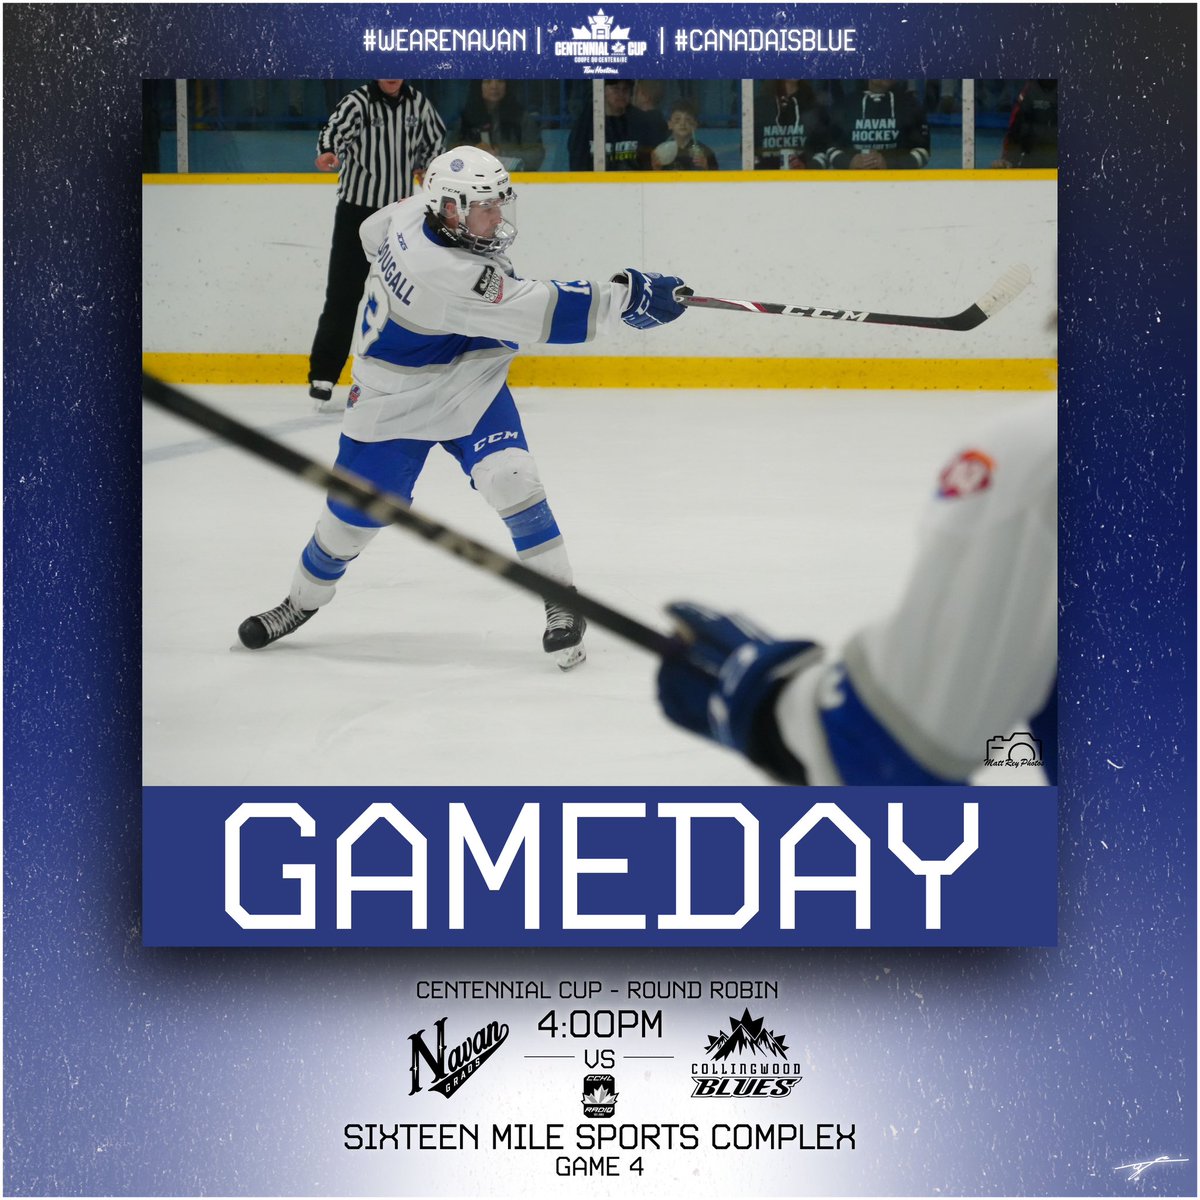 🔵⚪️ CENTENNIAL CUP GAMEDAY⚪️🔵 It’s Gameday as the Grads close out the round robin with a huge bout against the Collingwood Blues at 4:00! Tune in at CCHL Radio with Tyler Cyr and Josh Primeau #gameday #gametime #navan #hockey #playoffs #wearenavan #canadaisblue #ottawa